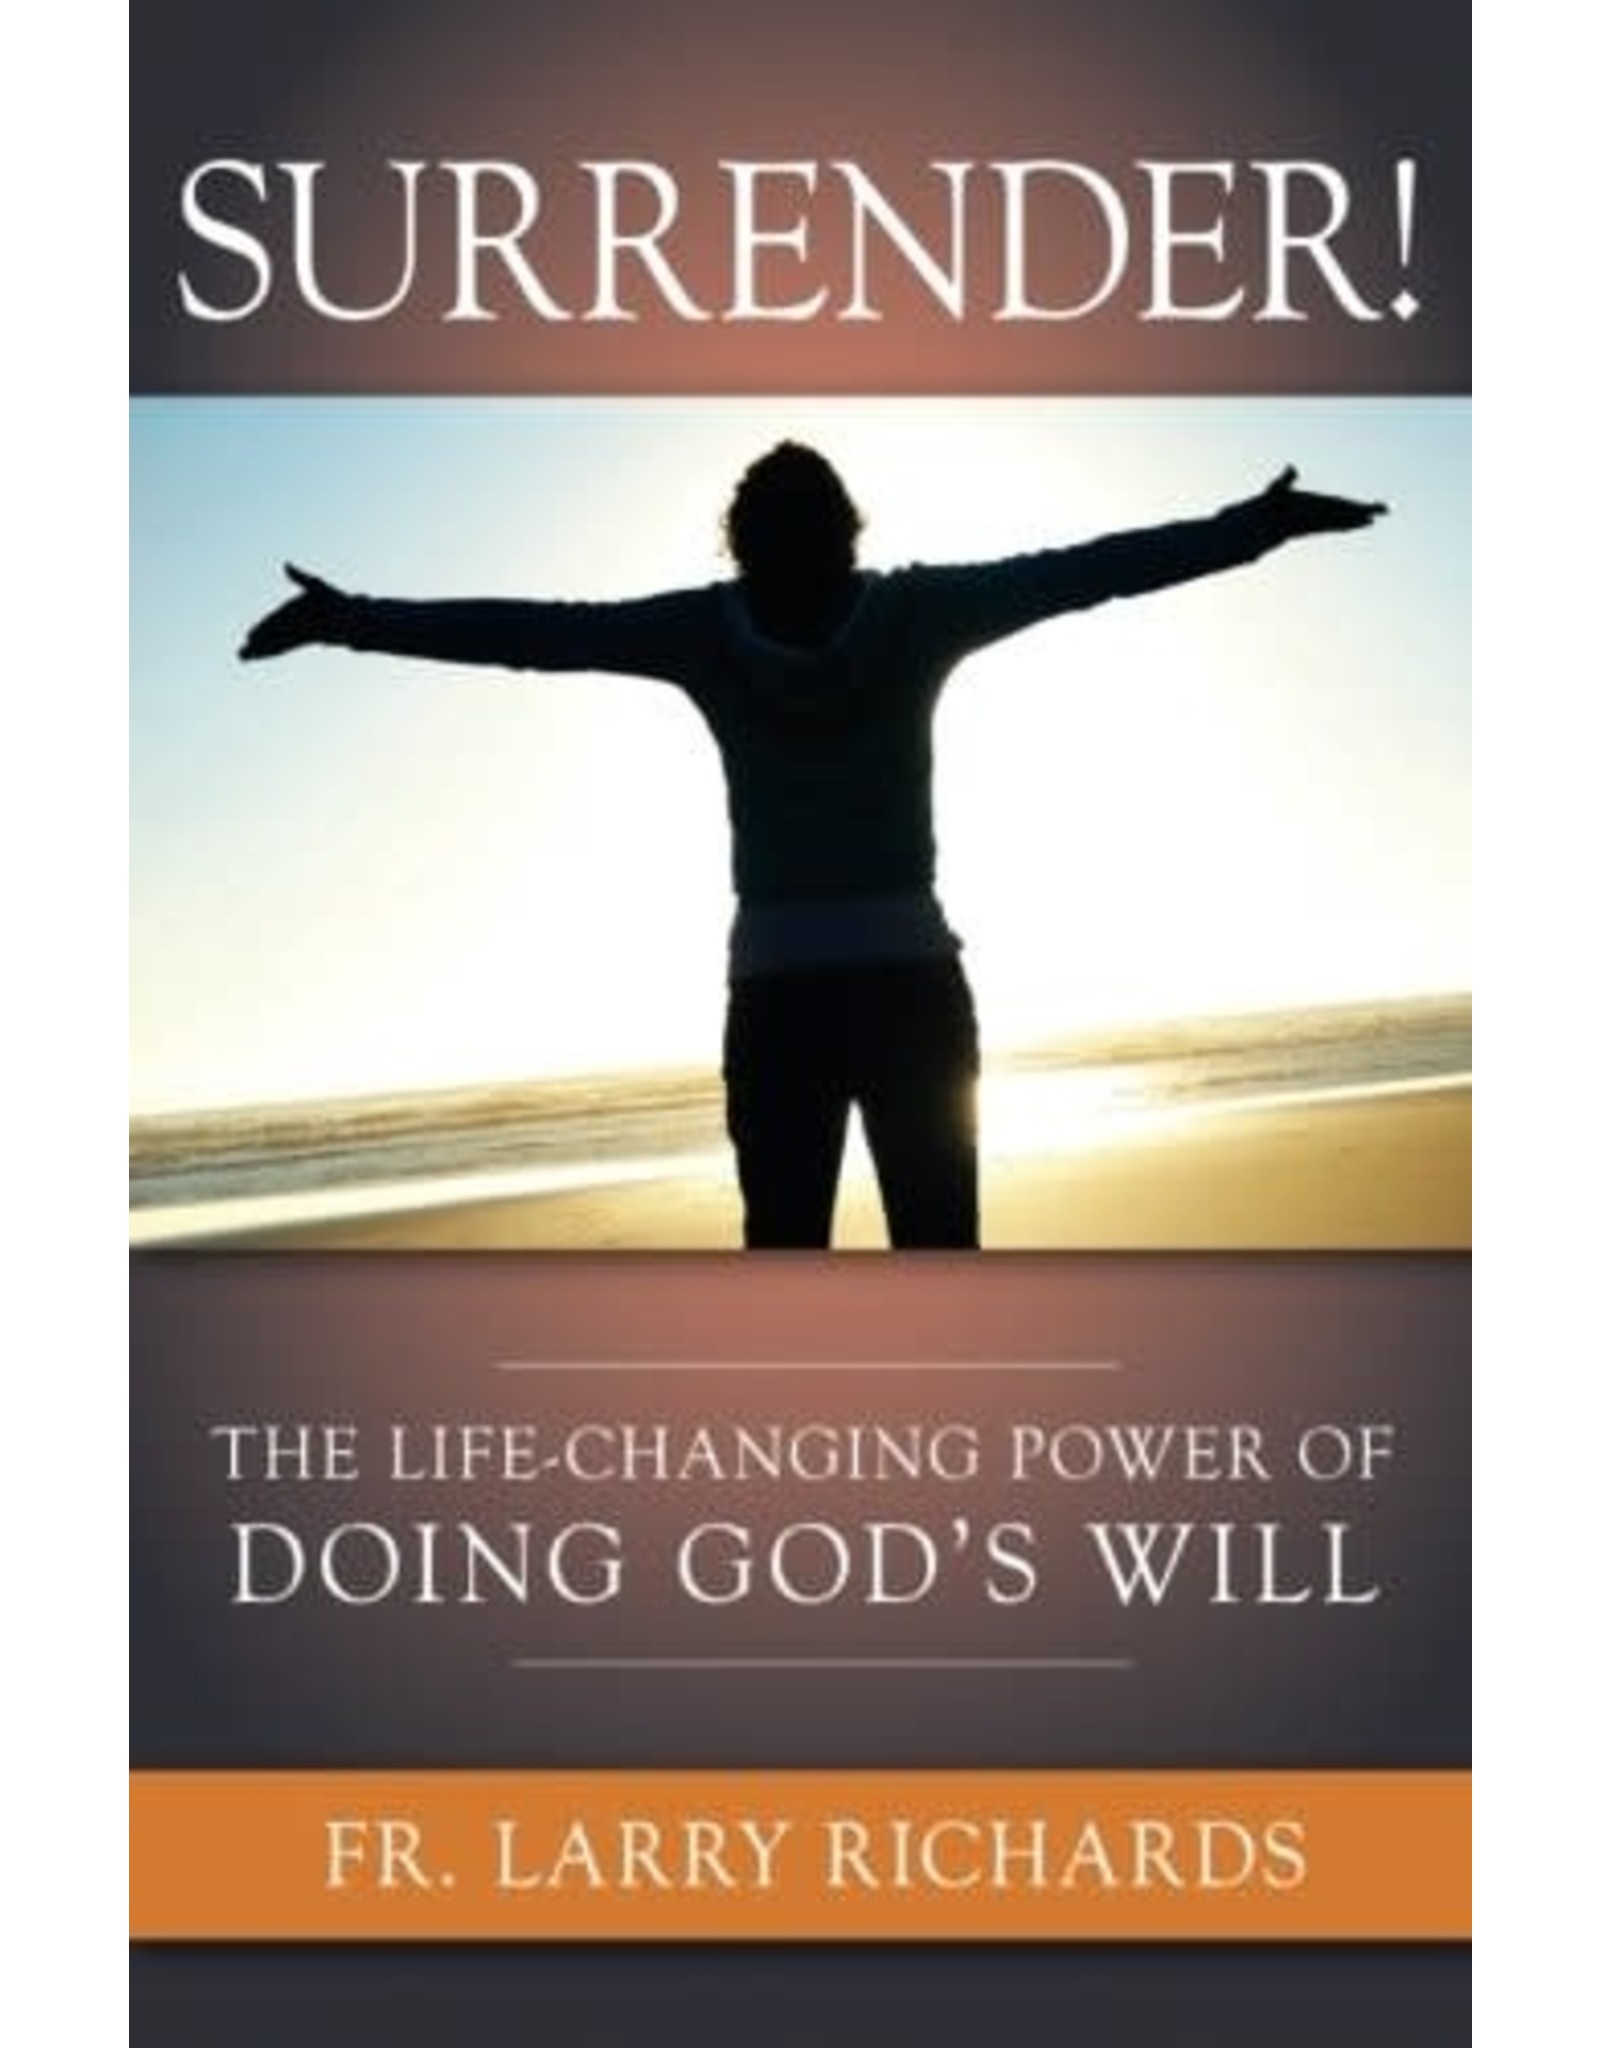 OSV (Our Sunday Visitor) Surrender! The Life-Changing Power of Doing God's Will